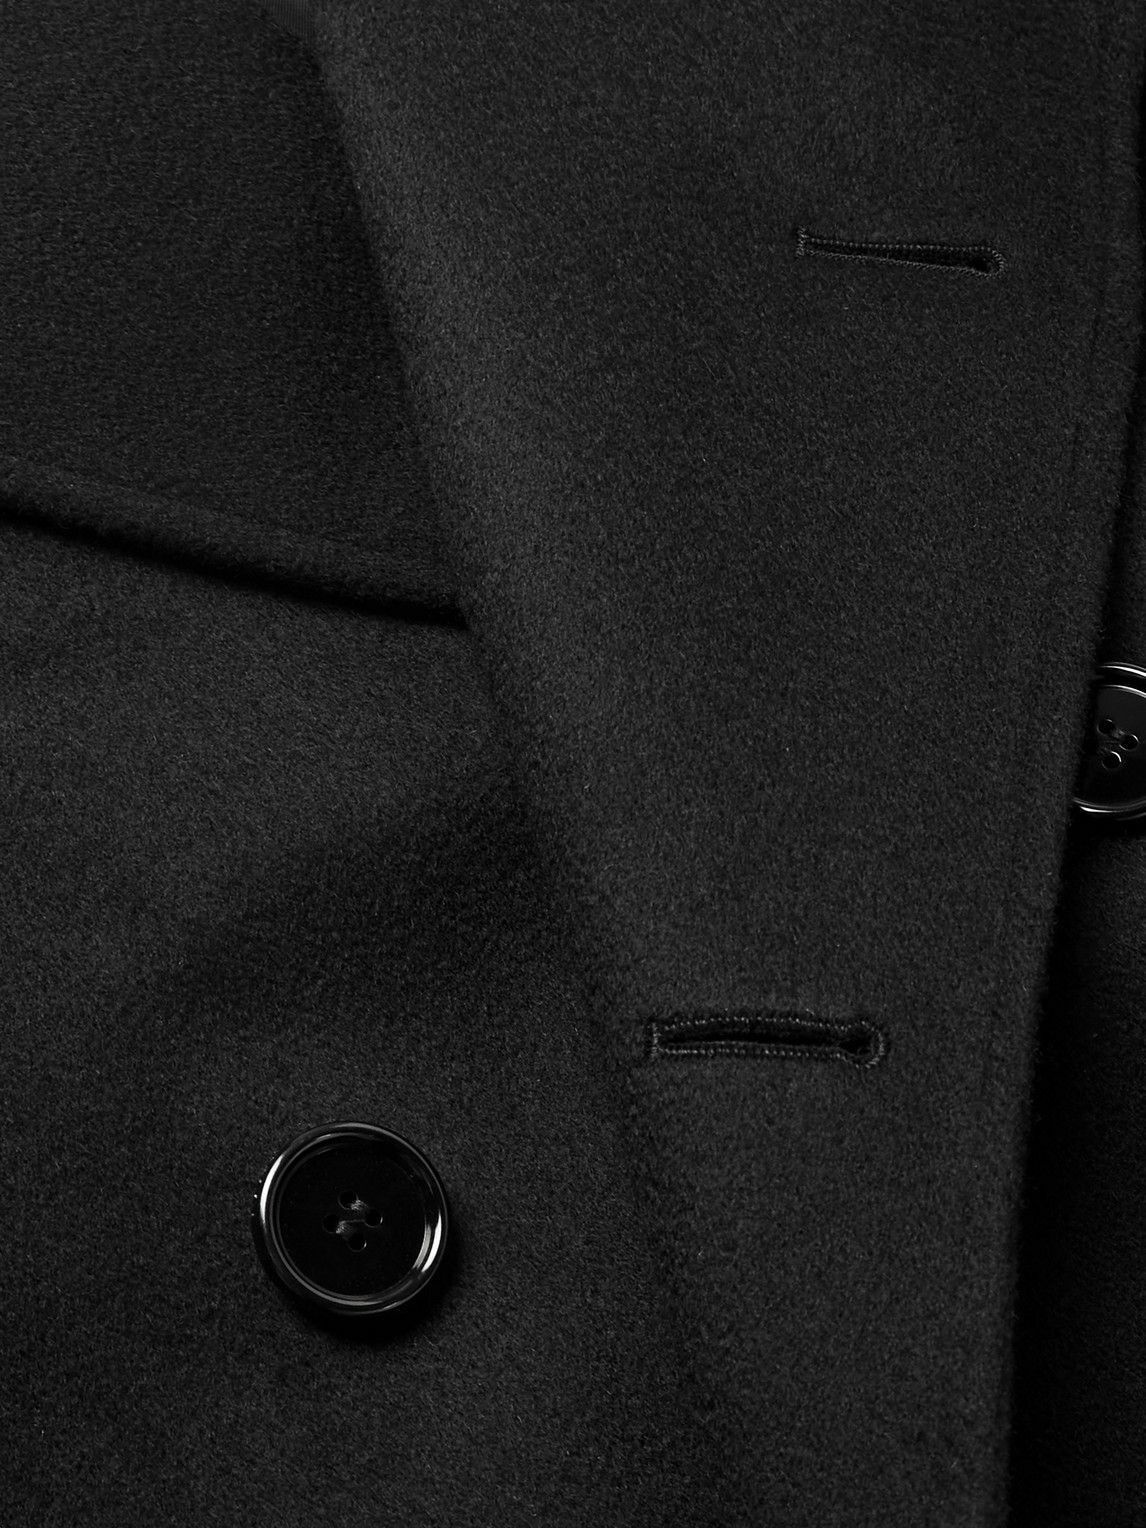 Burberry - Kensington Double-Breasted Cashmere Coat - Black Burberry